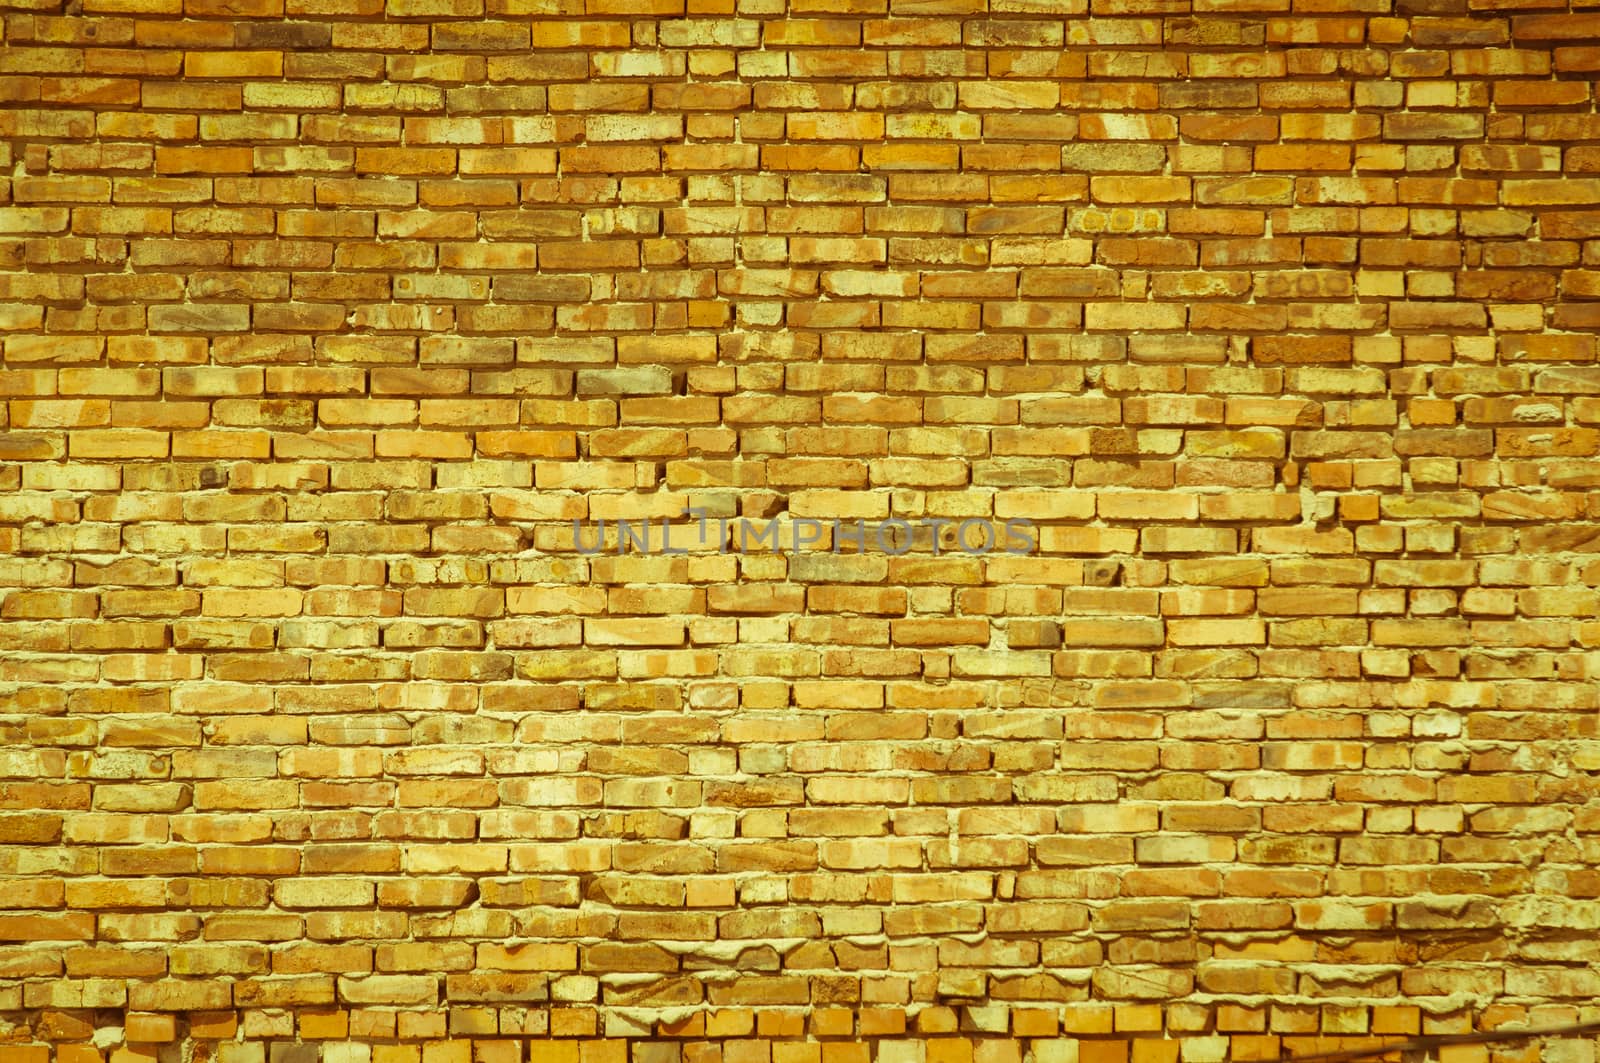 Textured old brick wall background, vintage style with copyspace